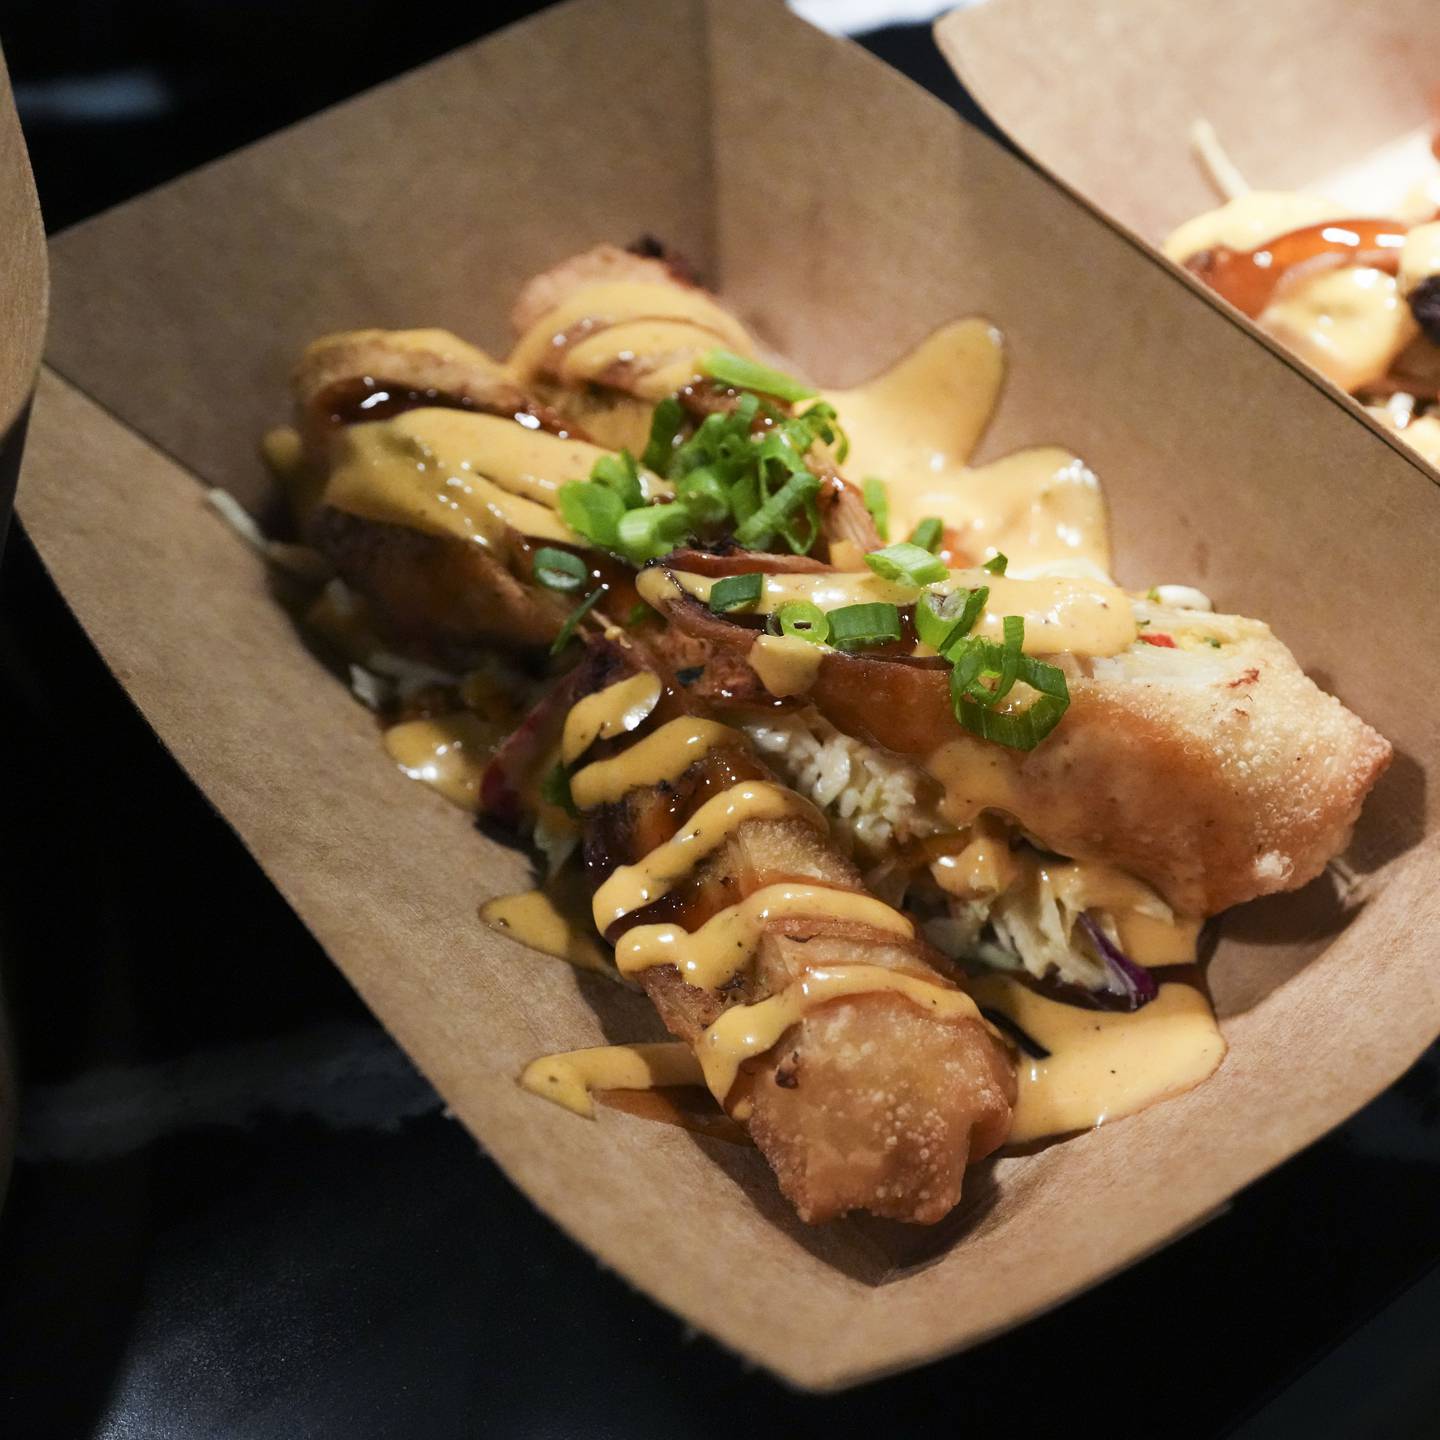 Crake cake eggrolls are just one of the new menu items available at the newly renovated arena.